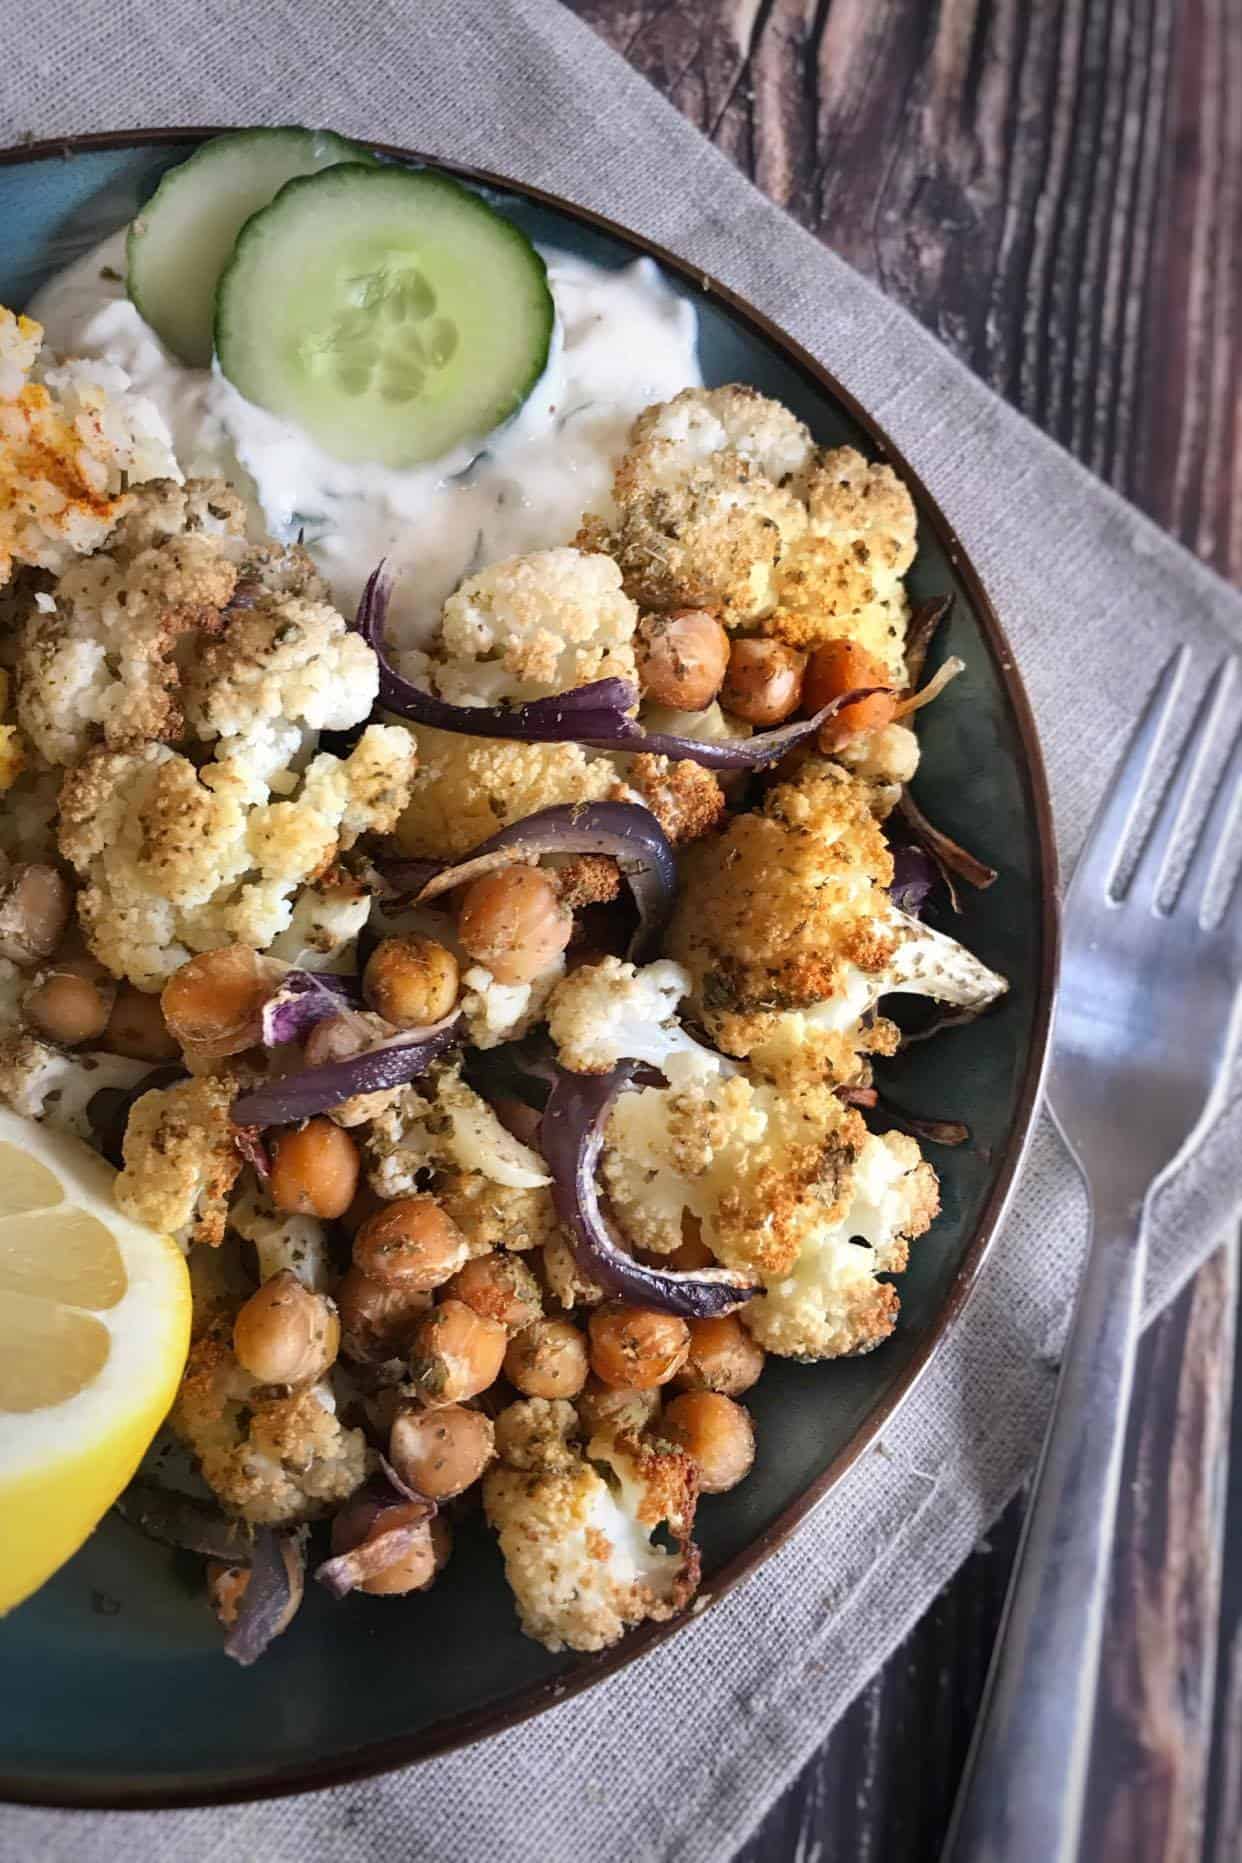 Cauliflower and chickpea bake with vegan tzatziki and couscous.